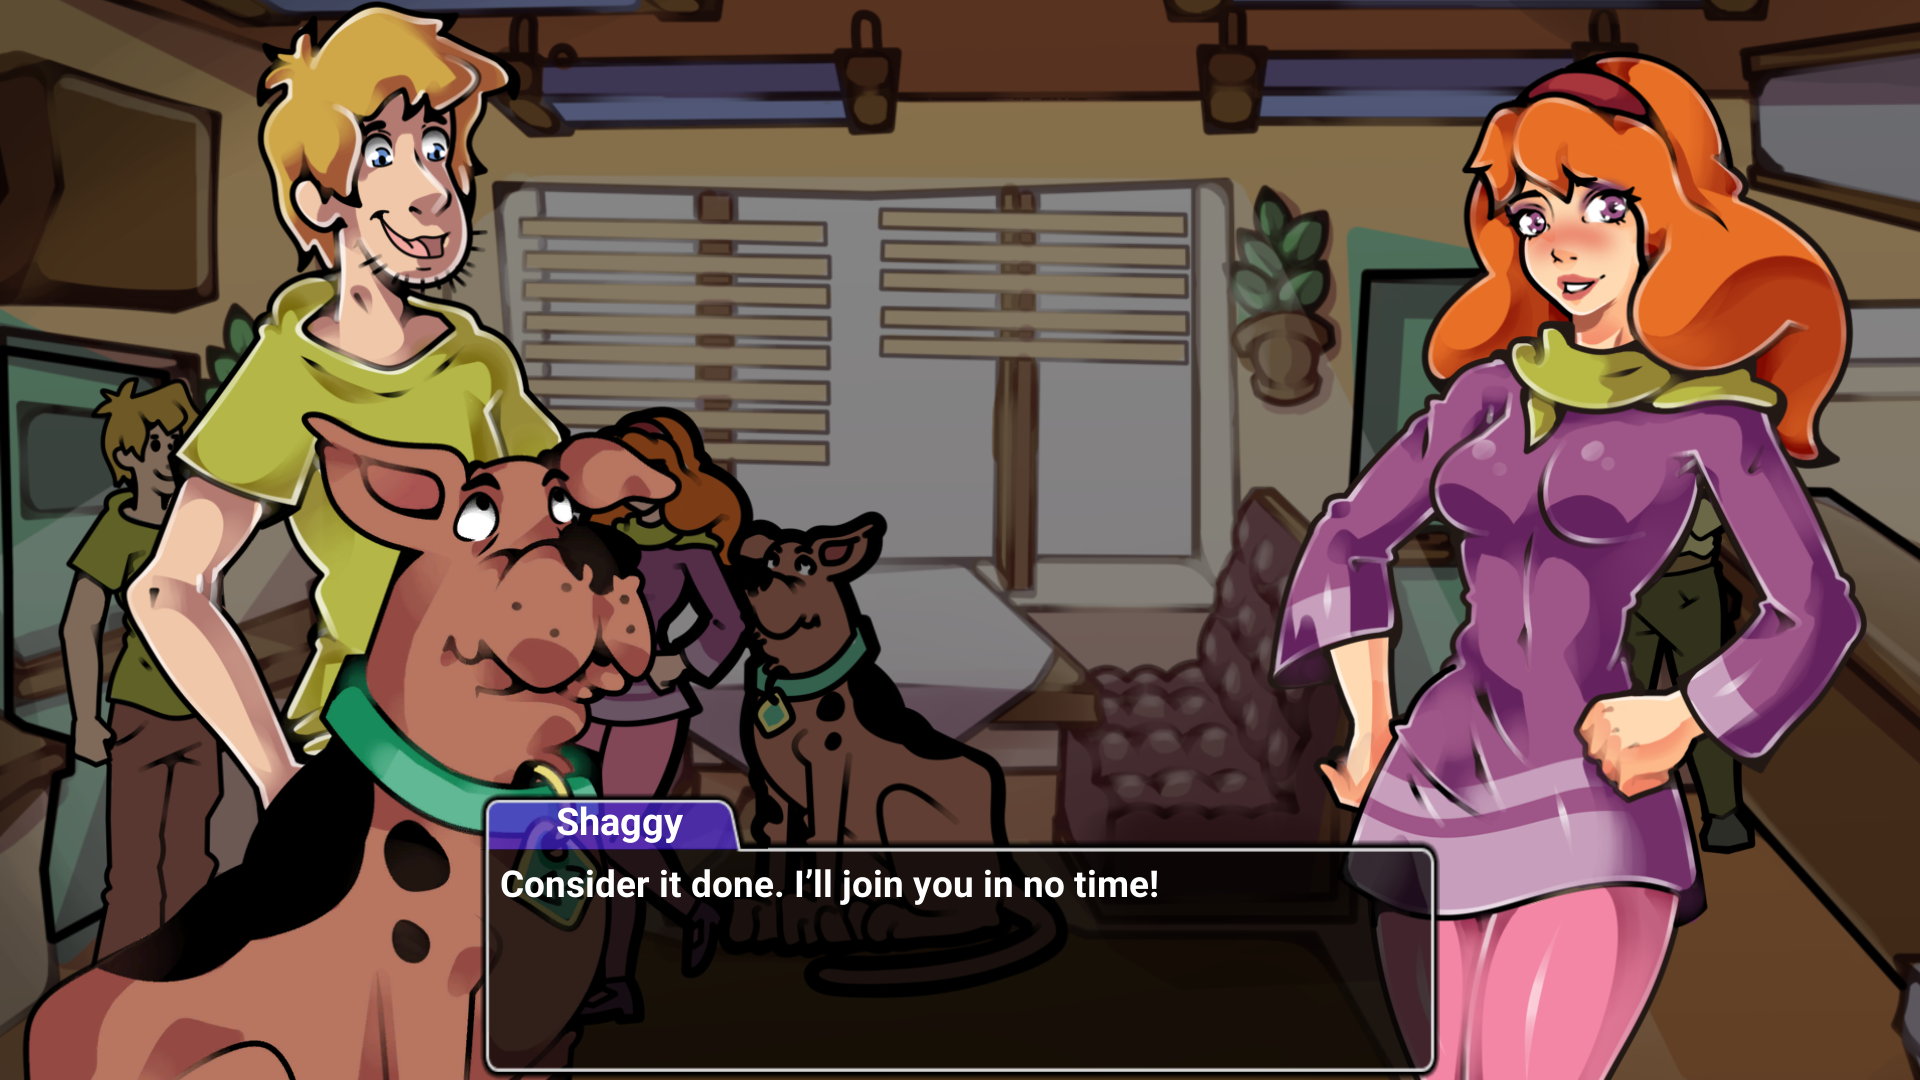 Scooby Doo Game Porn - Scooby-Doo! A Depraved Investigation [DEMO] - free game download, reviews,  mega - xGames